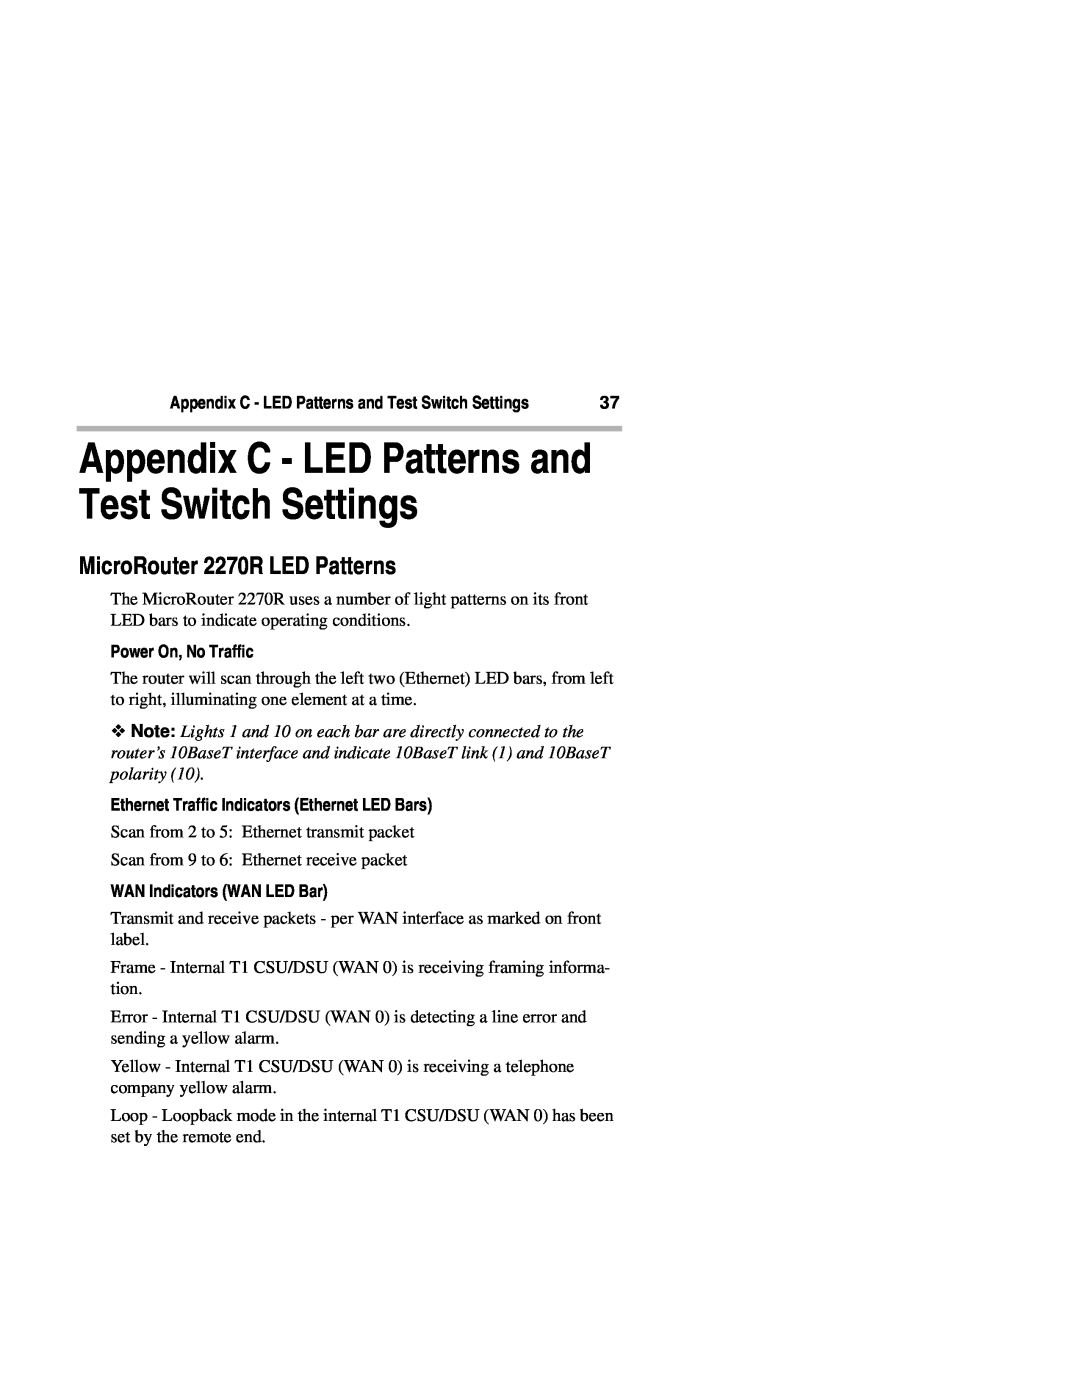 Compatible Systems manual MicroRouter 2270R LED Patterns, Appendix C - LED Patterns and Test Switch Settings 